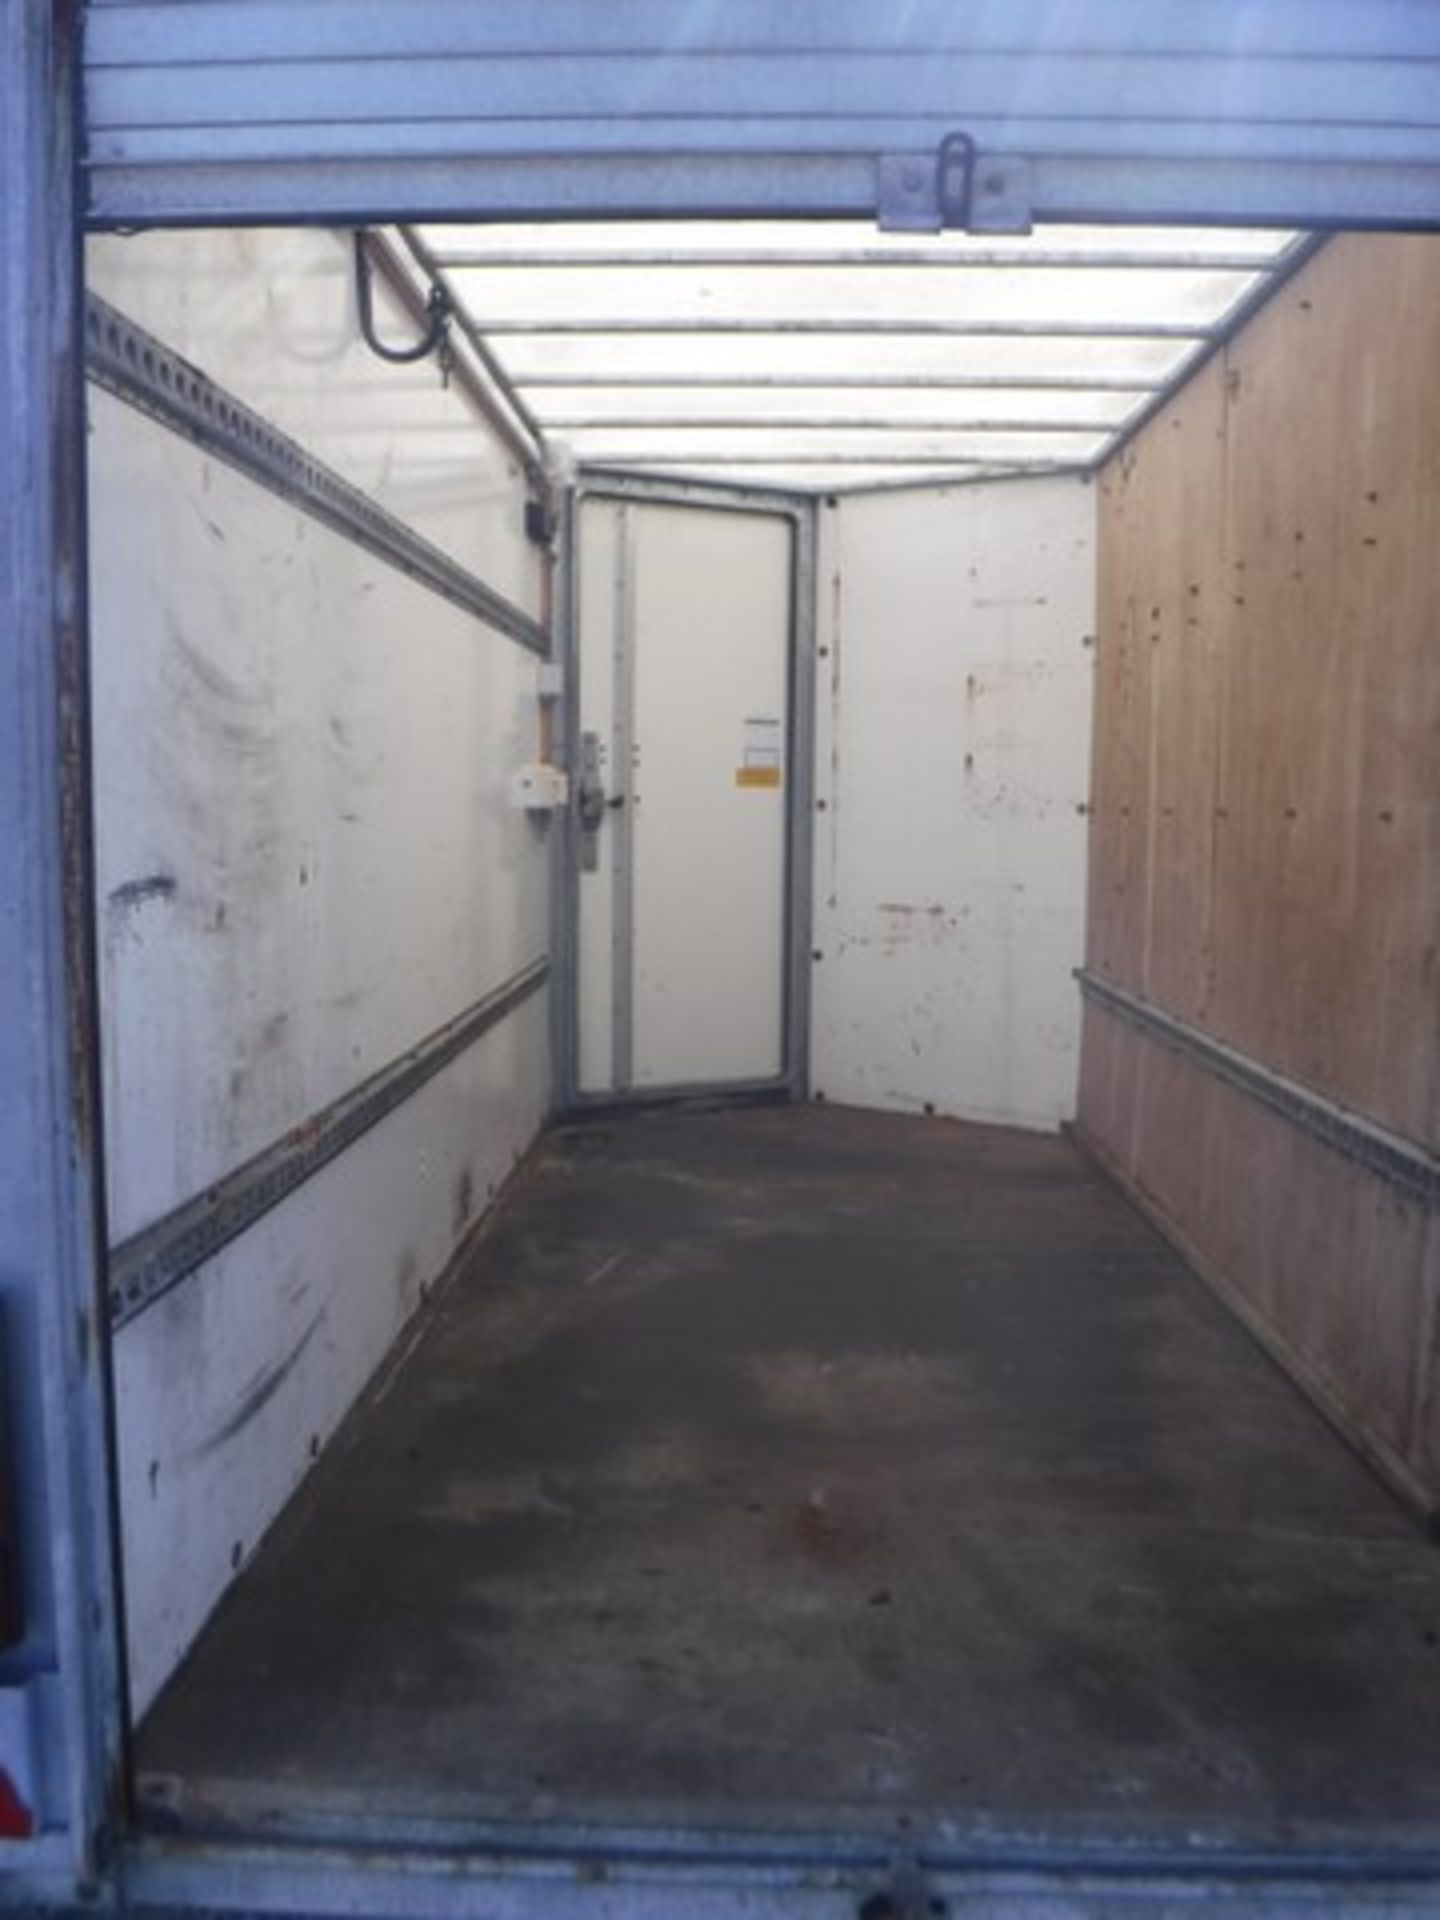 IFOR WILLIAMS 10' x 5' twin axle box trailer. Fitted with power points. VIN WO243243. Asset no. 758- - Image 3 of 6